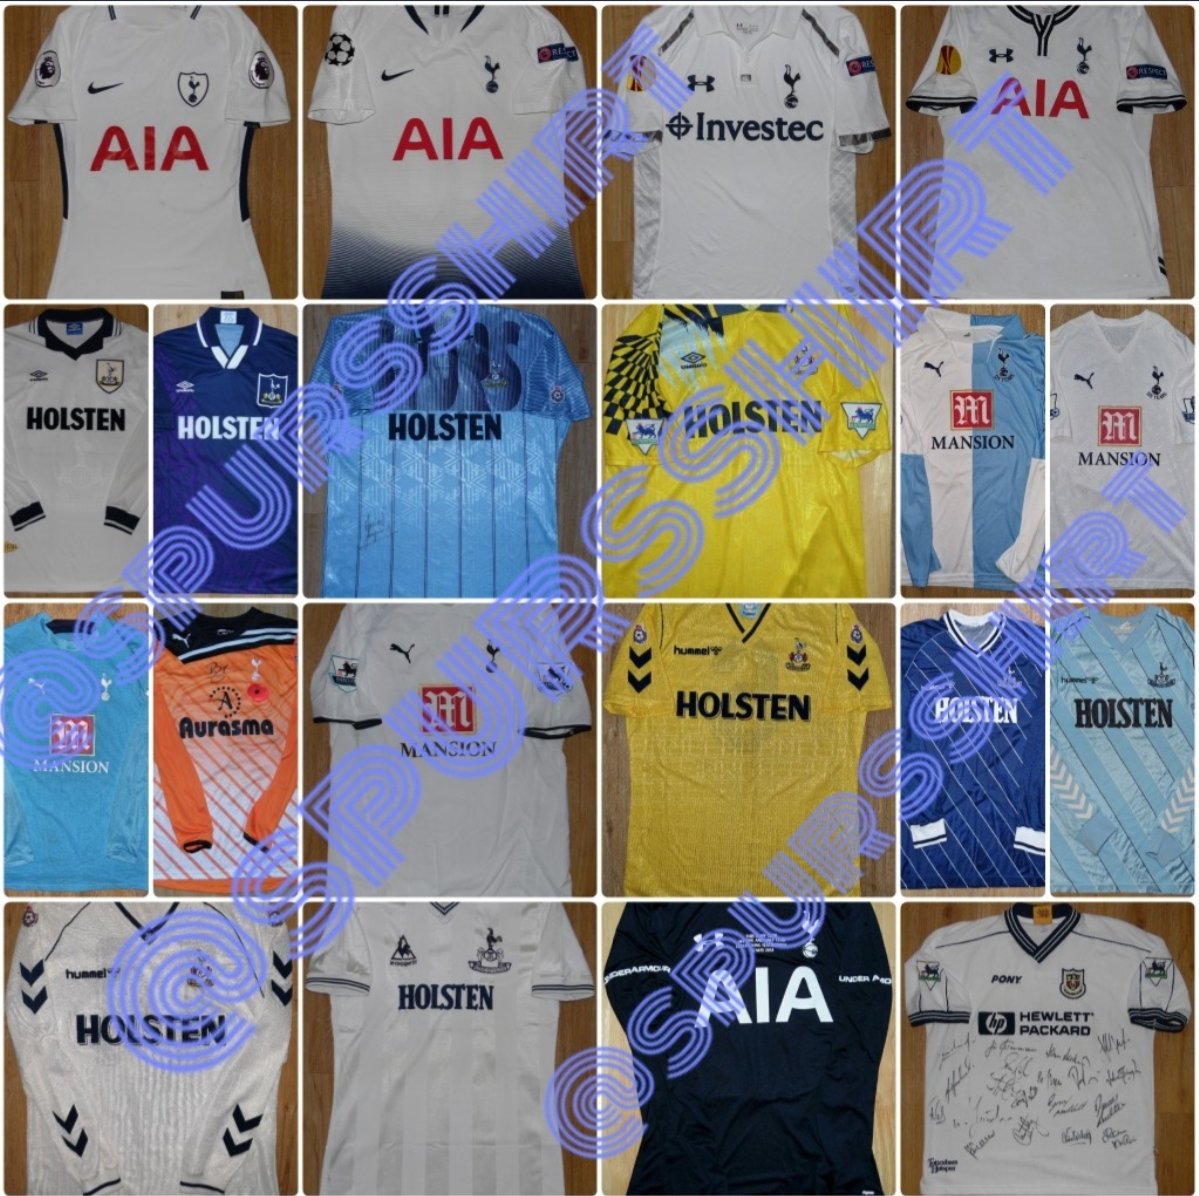 Tottenham Hotspur on X: Spurs 2013/14 Home & Away kit. Pre-order:   #OurArmour #THFC  / X